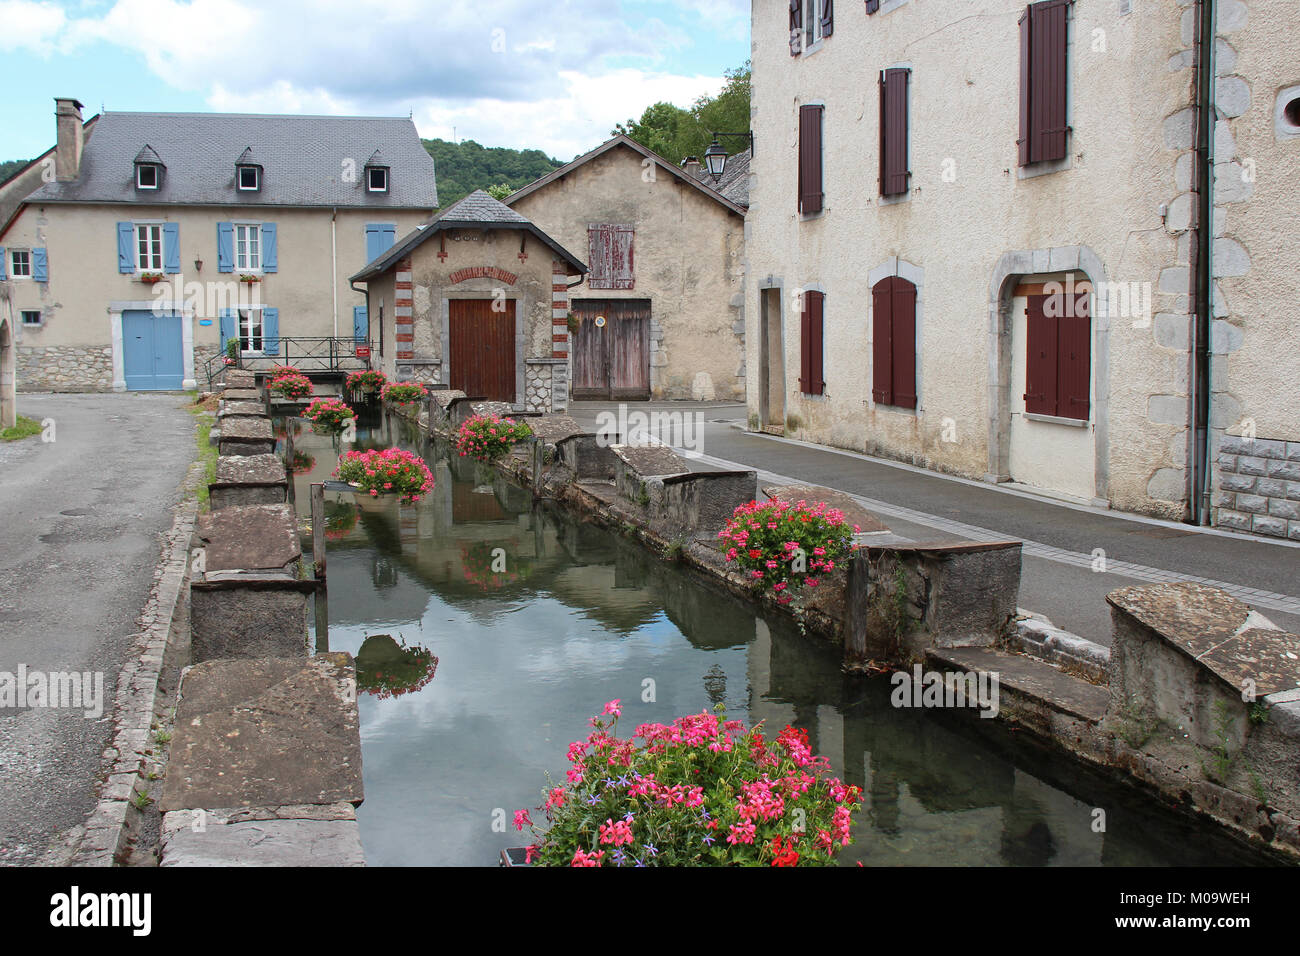 In Arudy (France). Stock Photo